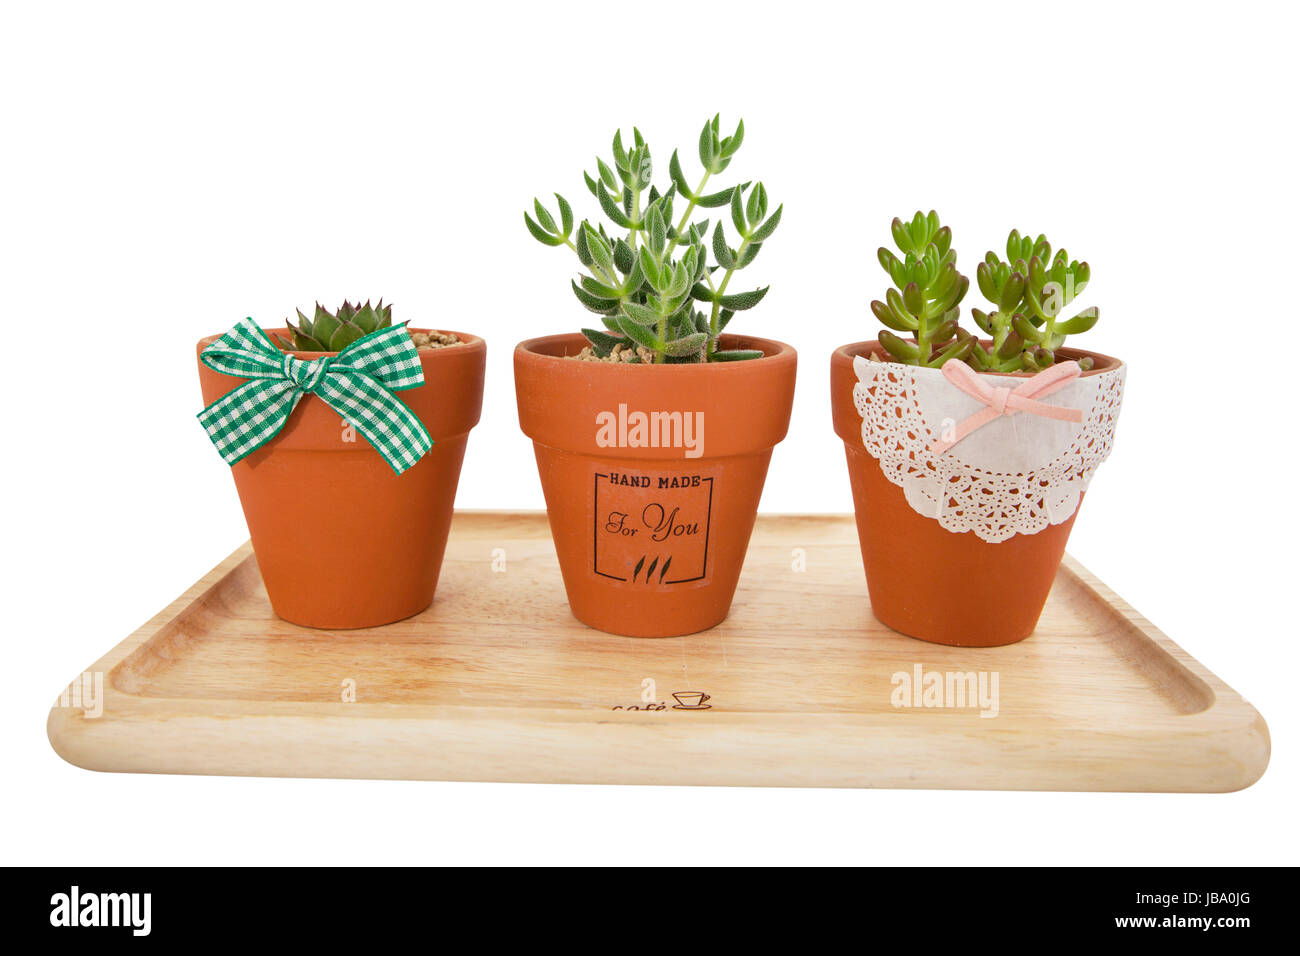 Three terracotta flowerpots with green leafy herbs growing in them arranged on a wooden tray with decorative bows on the pots for indoor plant cultivation Stock Photo